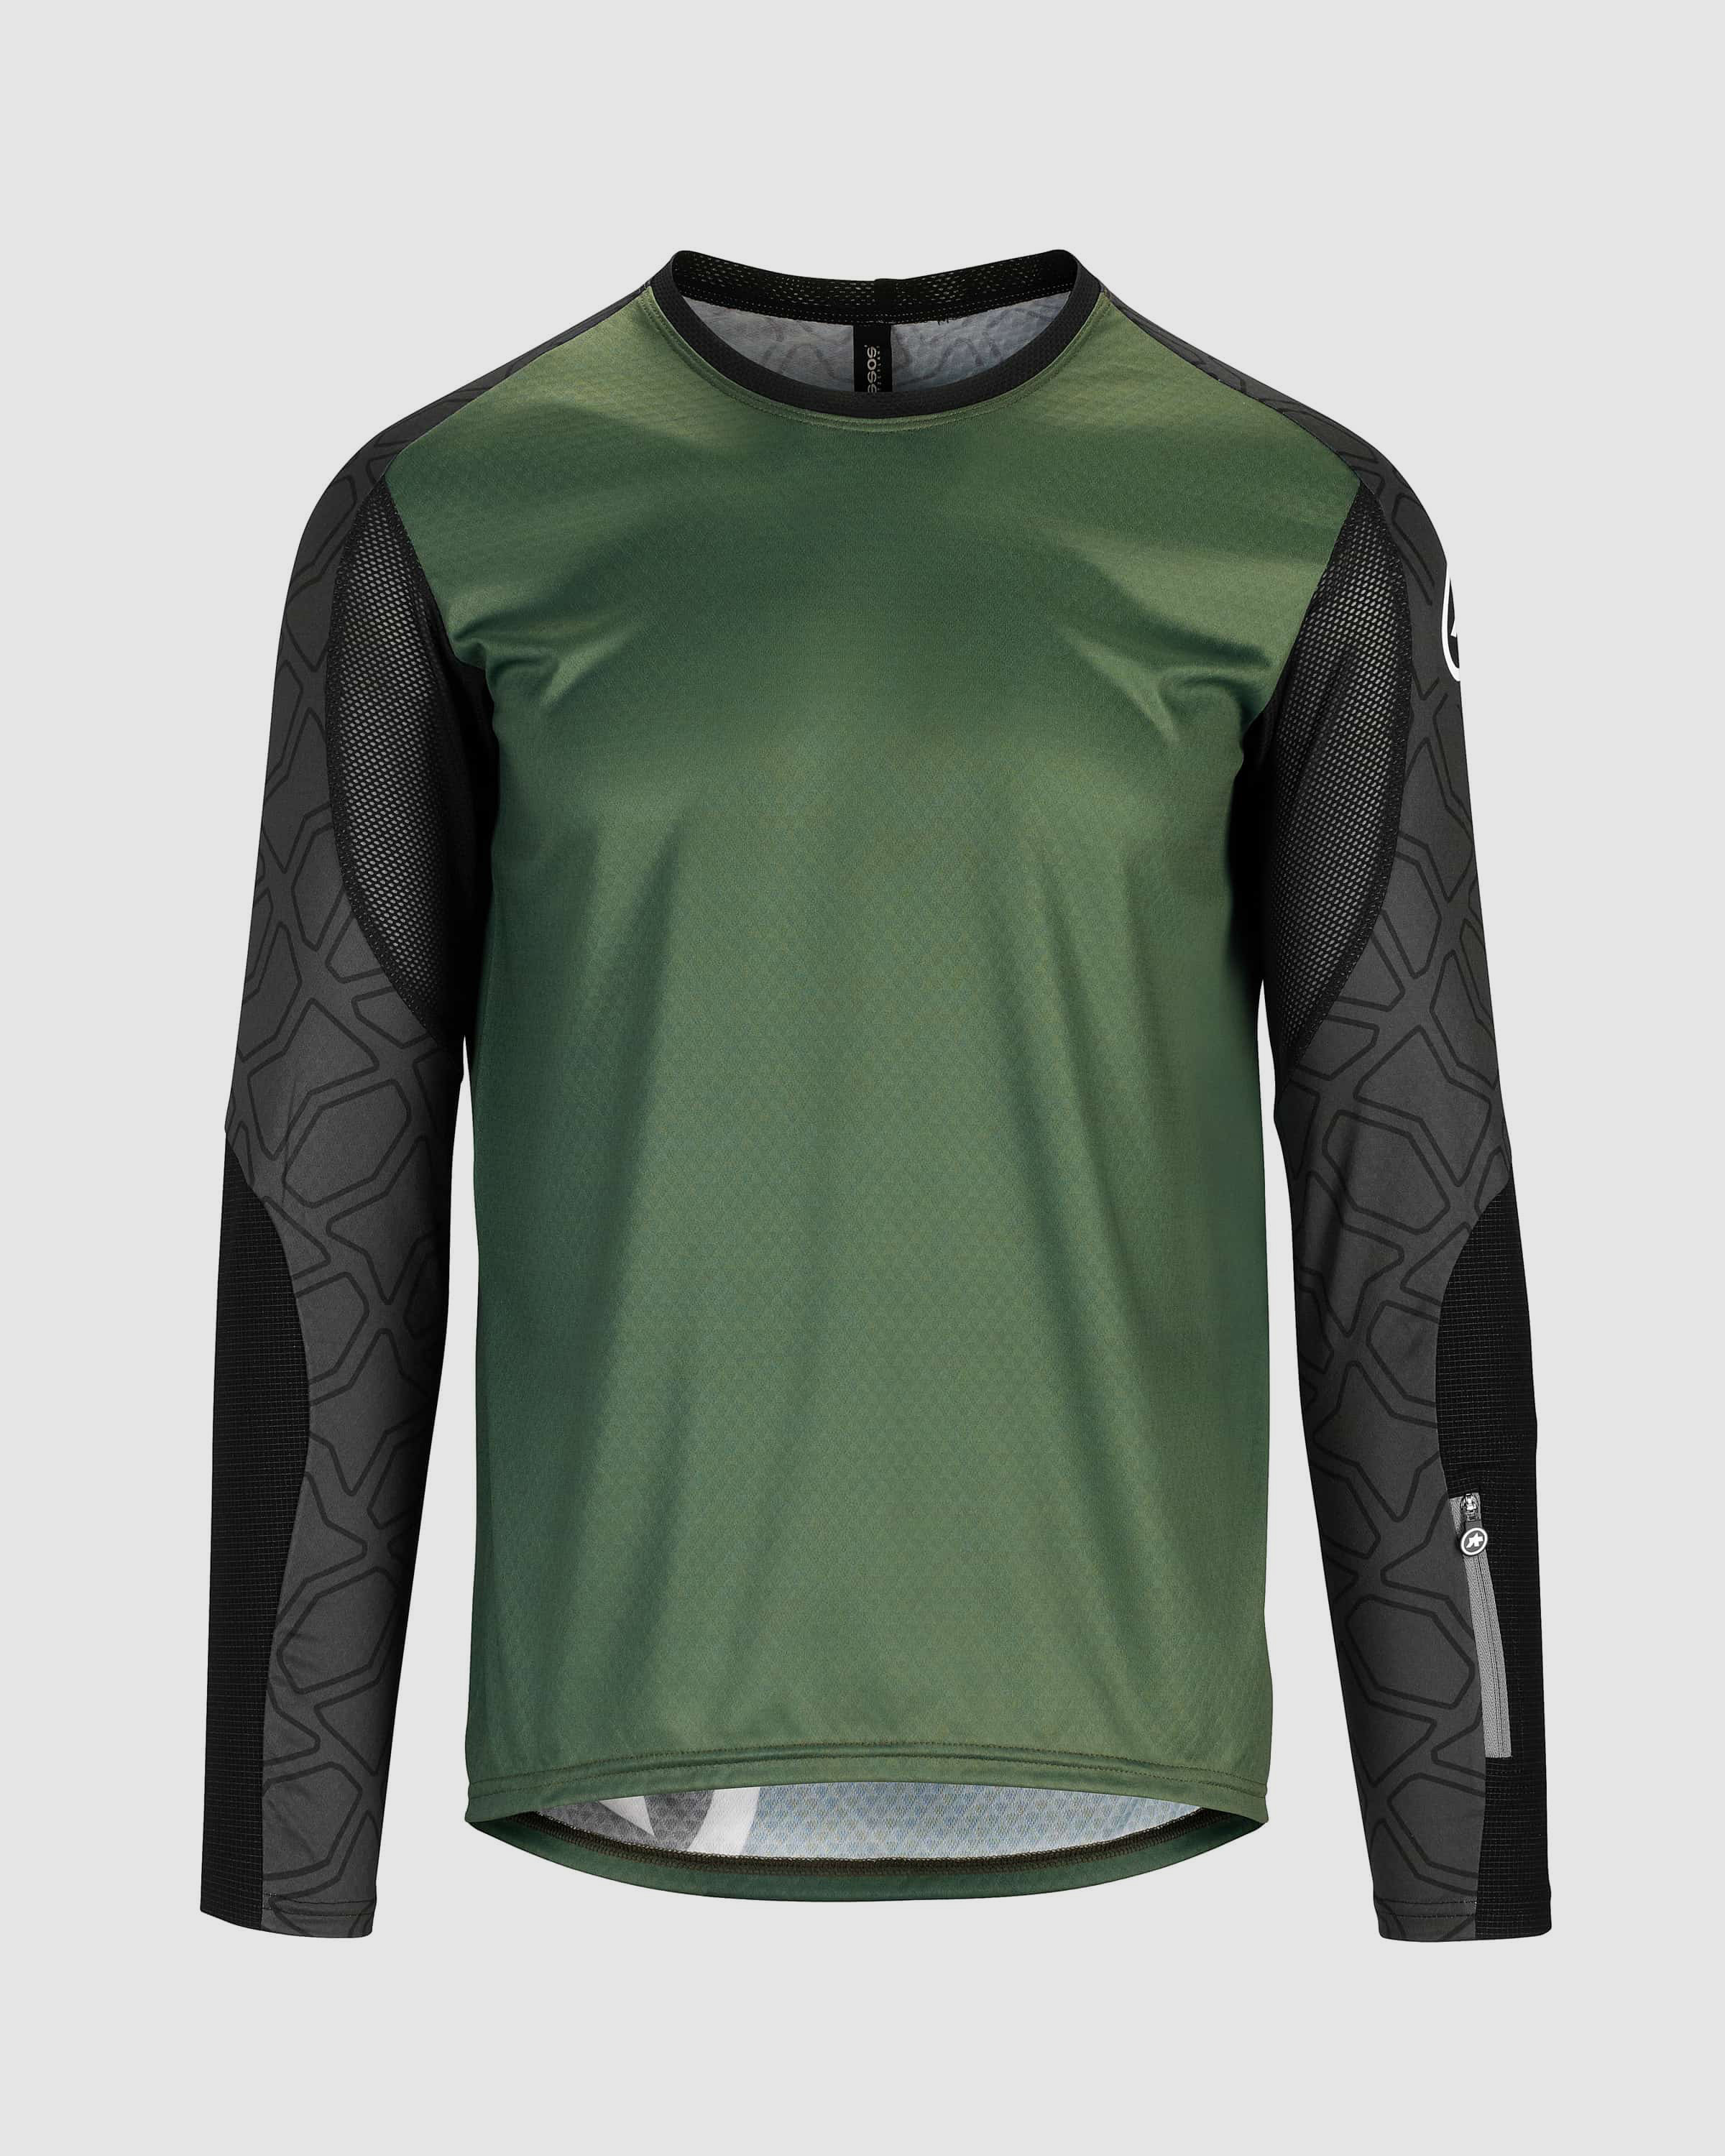 TRAIL LS Jersey - ASSOS Of Switzerland - Official Outlet